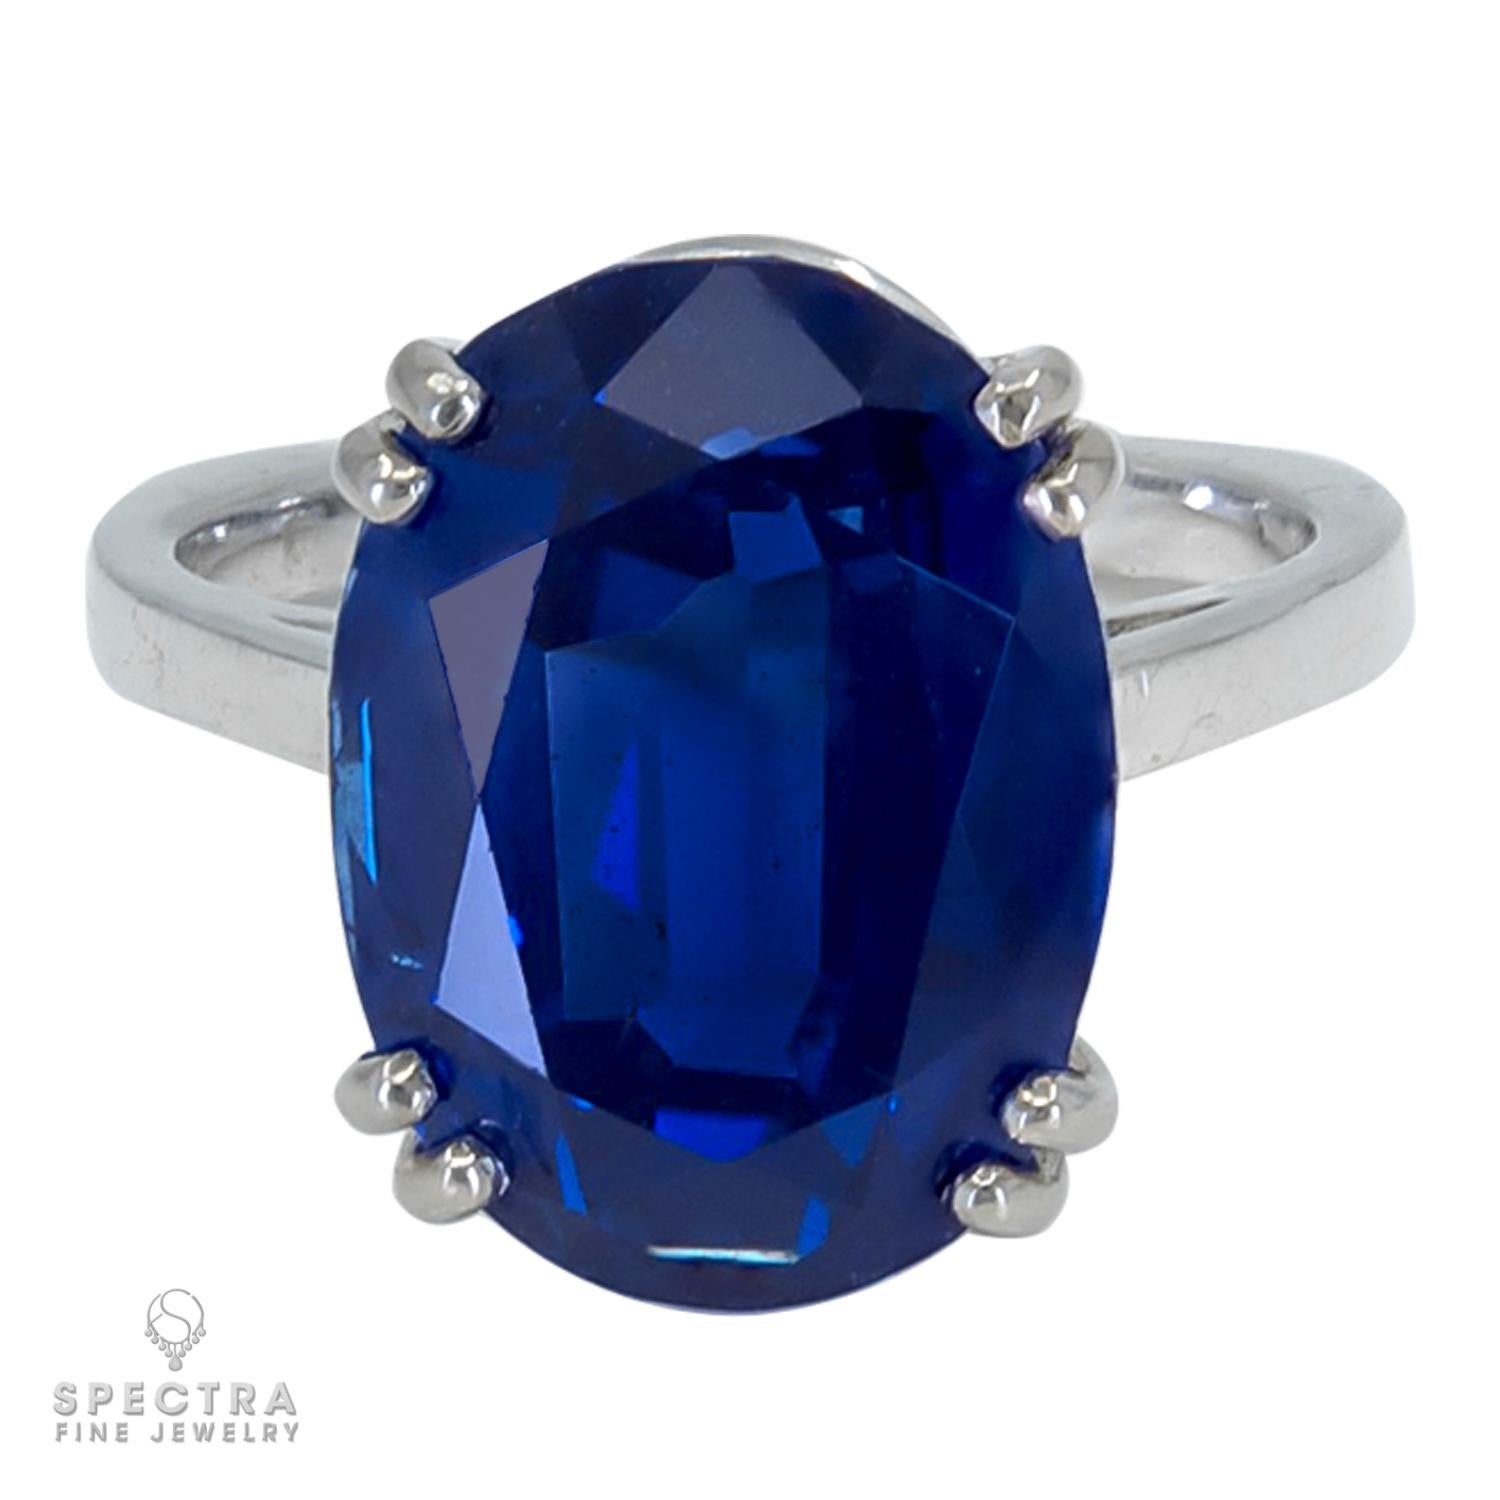 Oval Cut Spectra Fine Jewelry Certified 15.29 Carat Unheated Sapphire Cocktail Ring For Sale